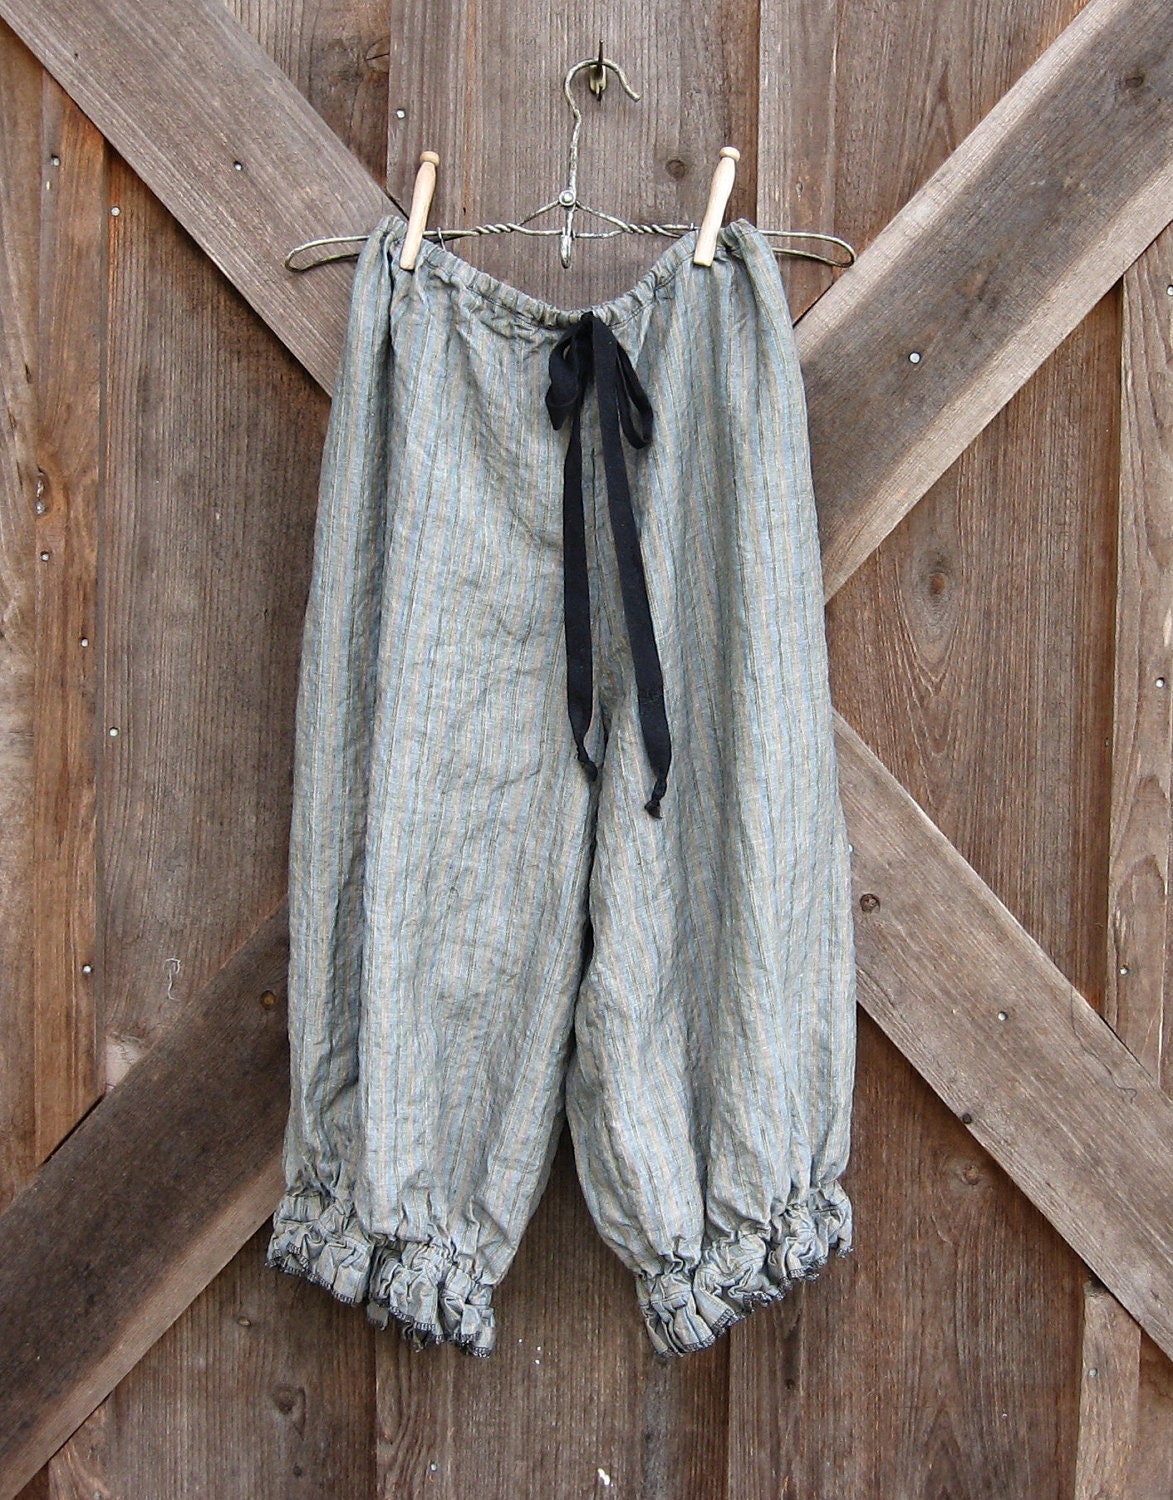 Unavailable Listing on Etsy | Bloomers, Natural clothing, Clothes